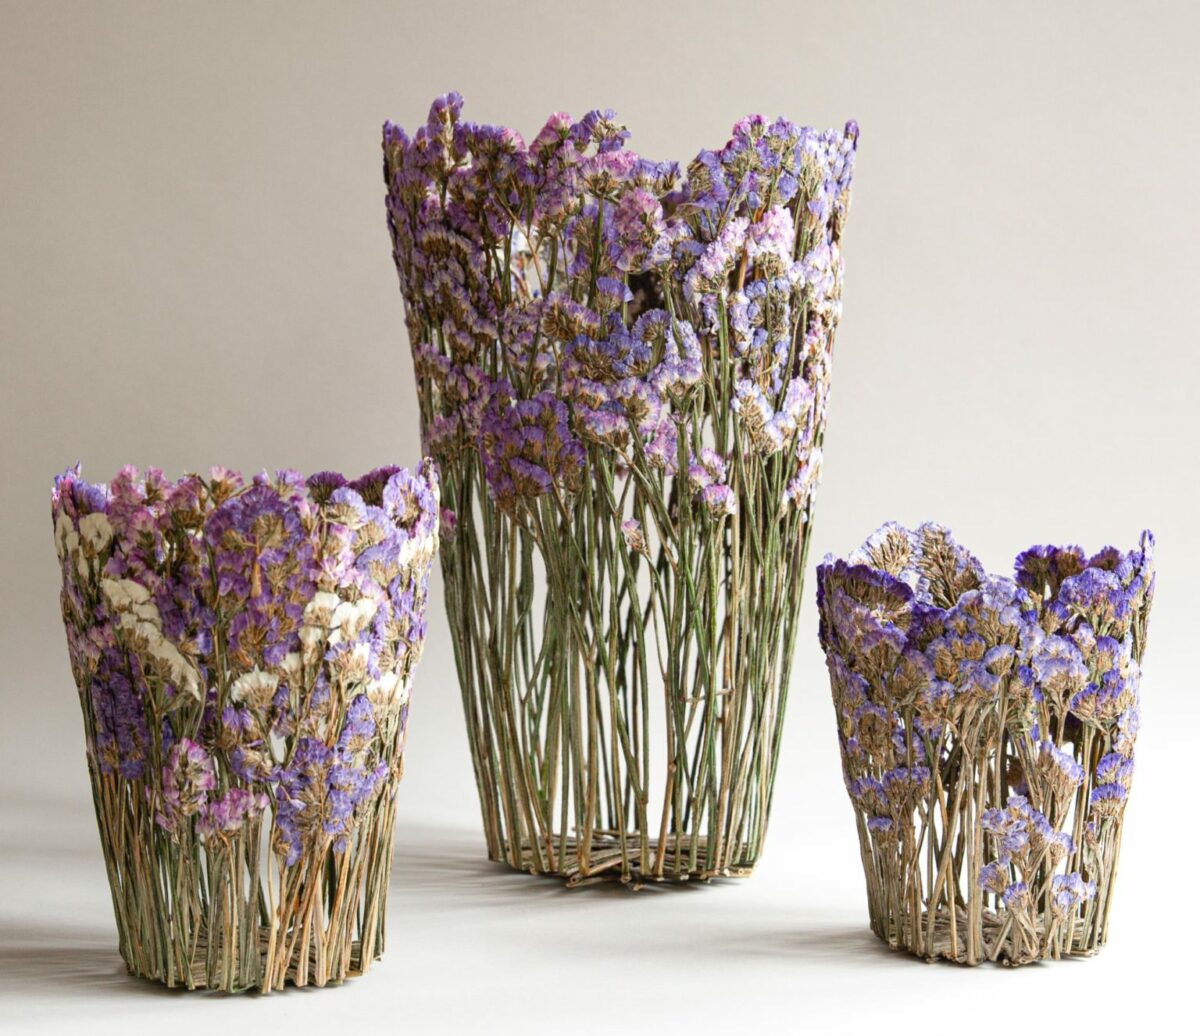 Bouquet Delicate Sculptural Vessels Made Of Dried And Pressed Flowers By Shannon Clegg (4)